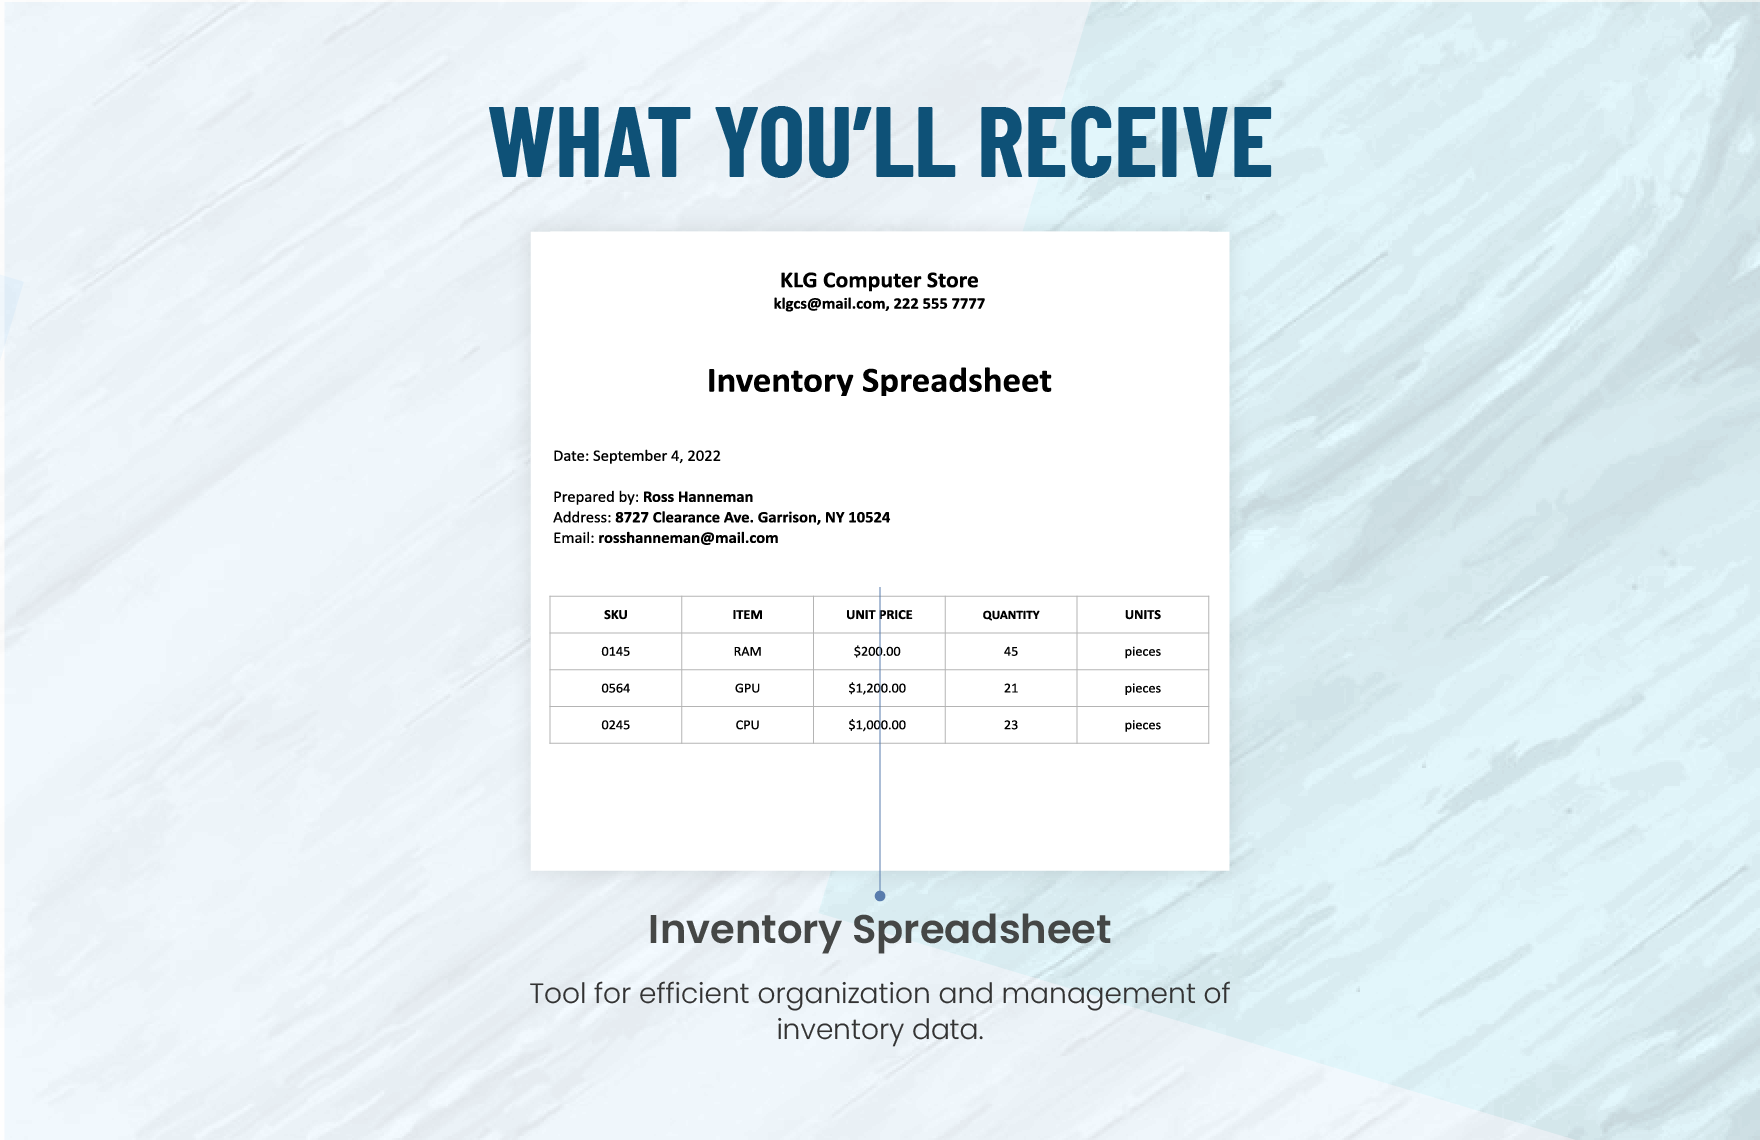 Inventory spreadsheet Instructions